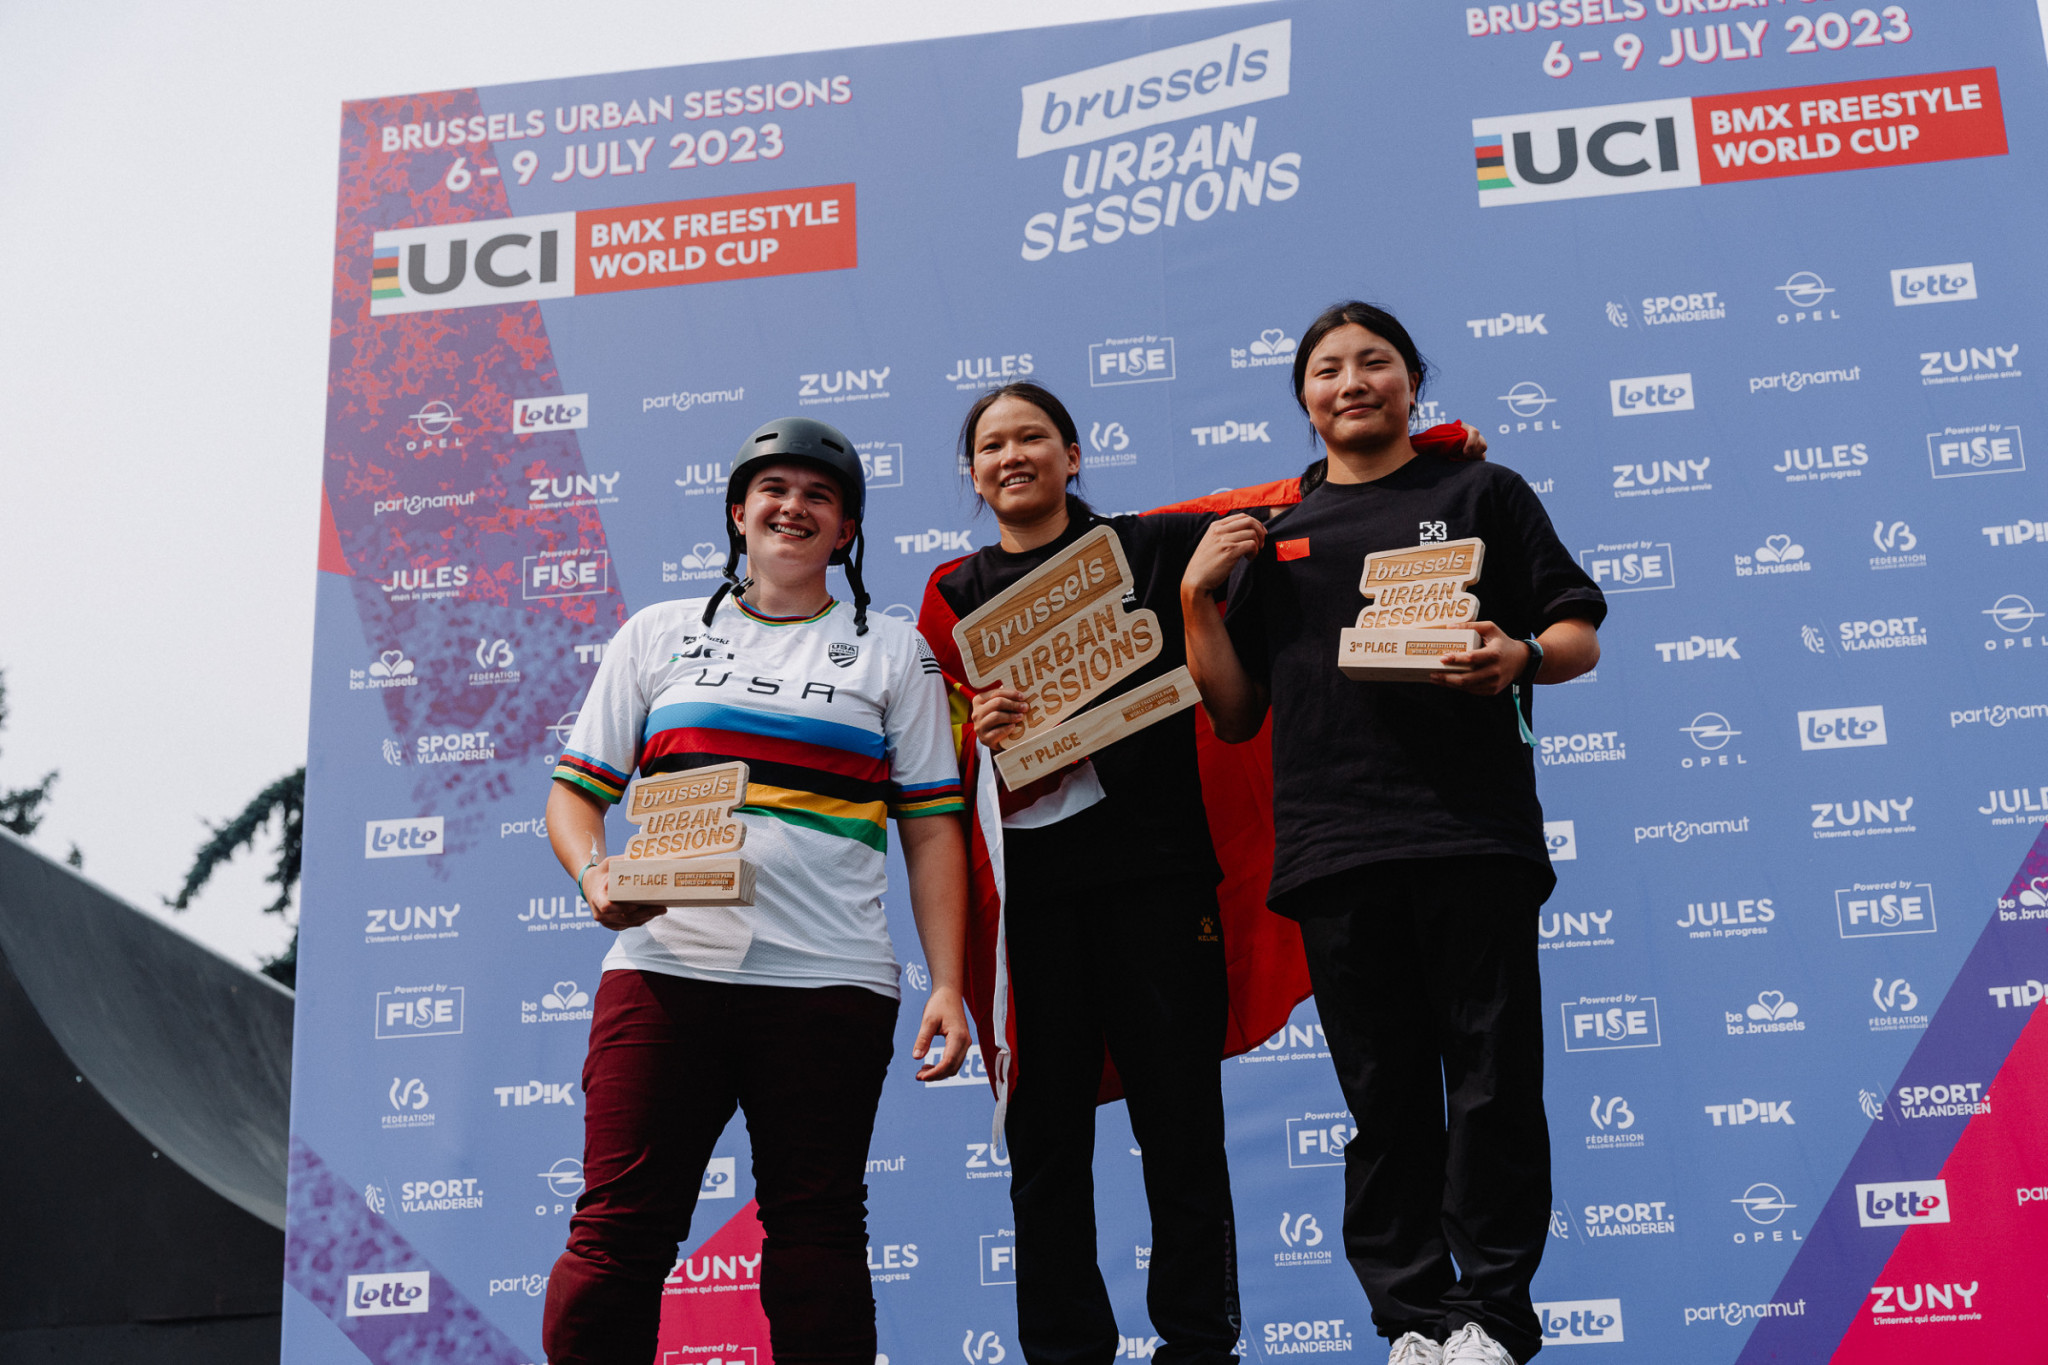 Huimin Zhou, centre, of China won the Brussels stop of the BMX Freestyle World Cup circuit, in the women's park event ©UCI